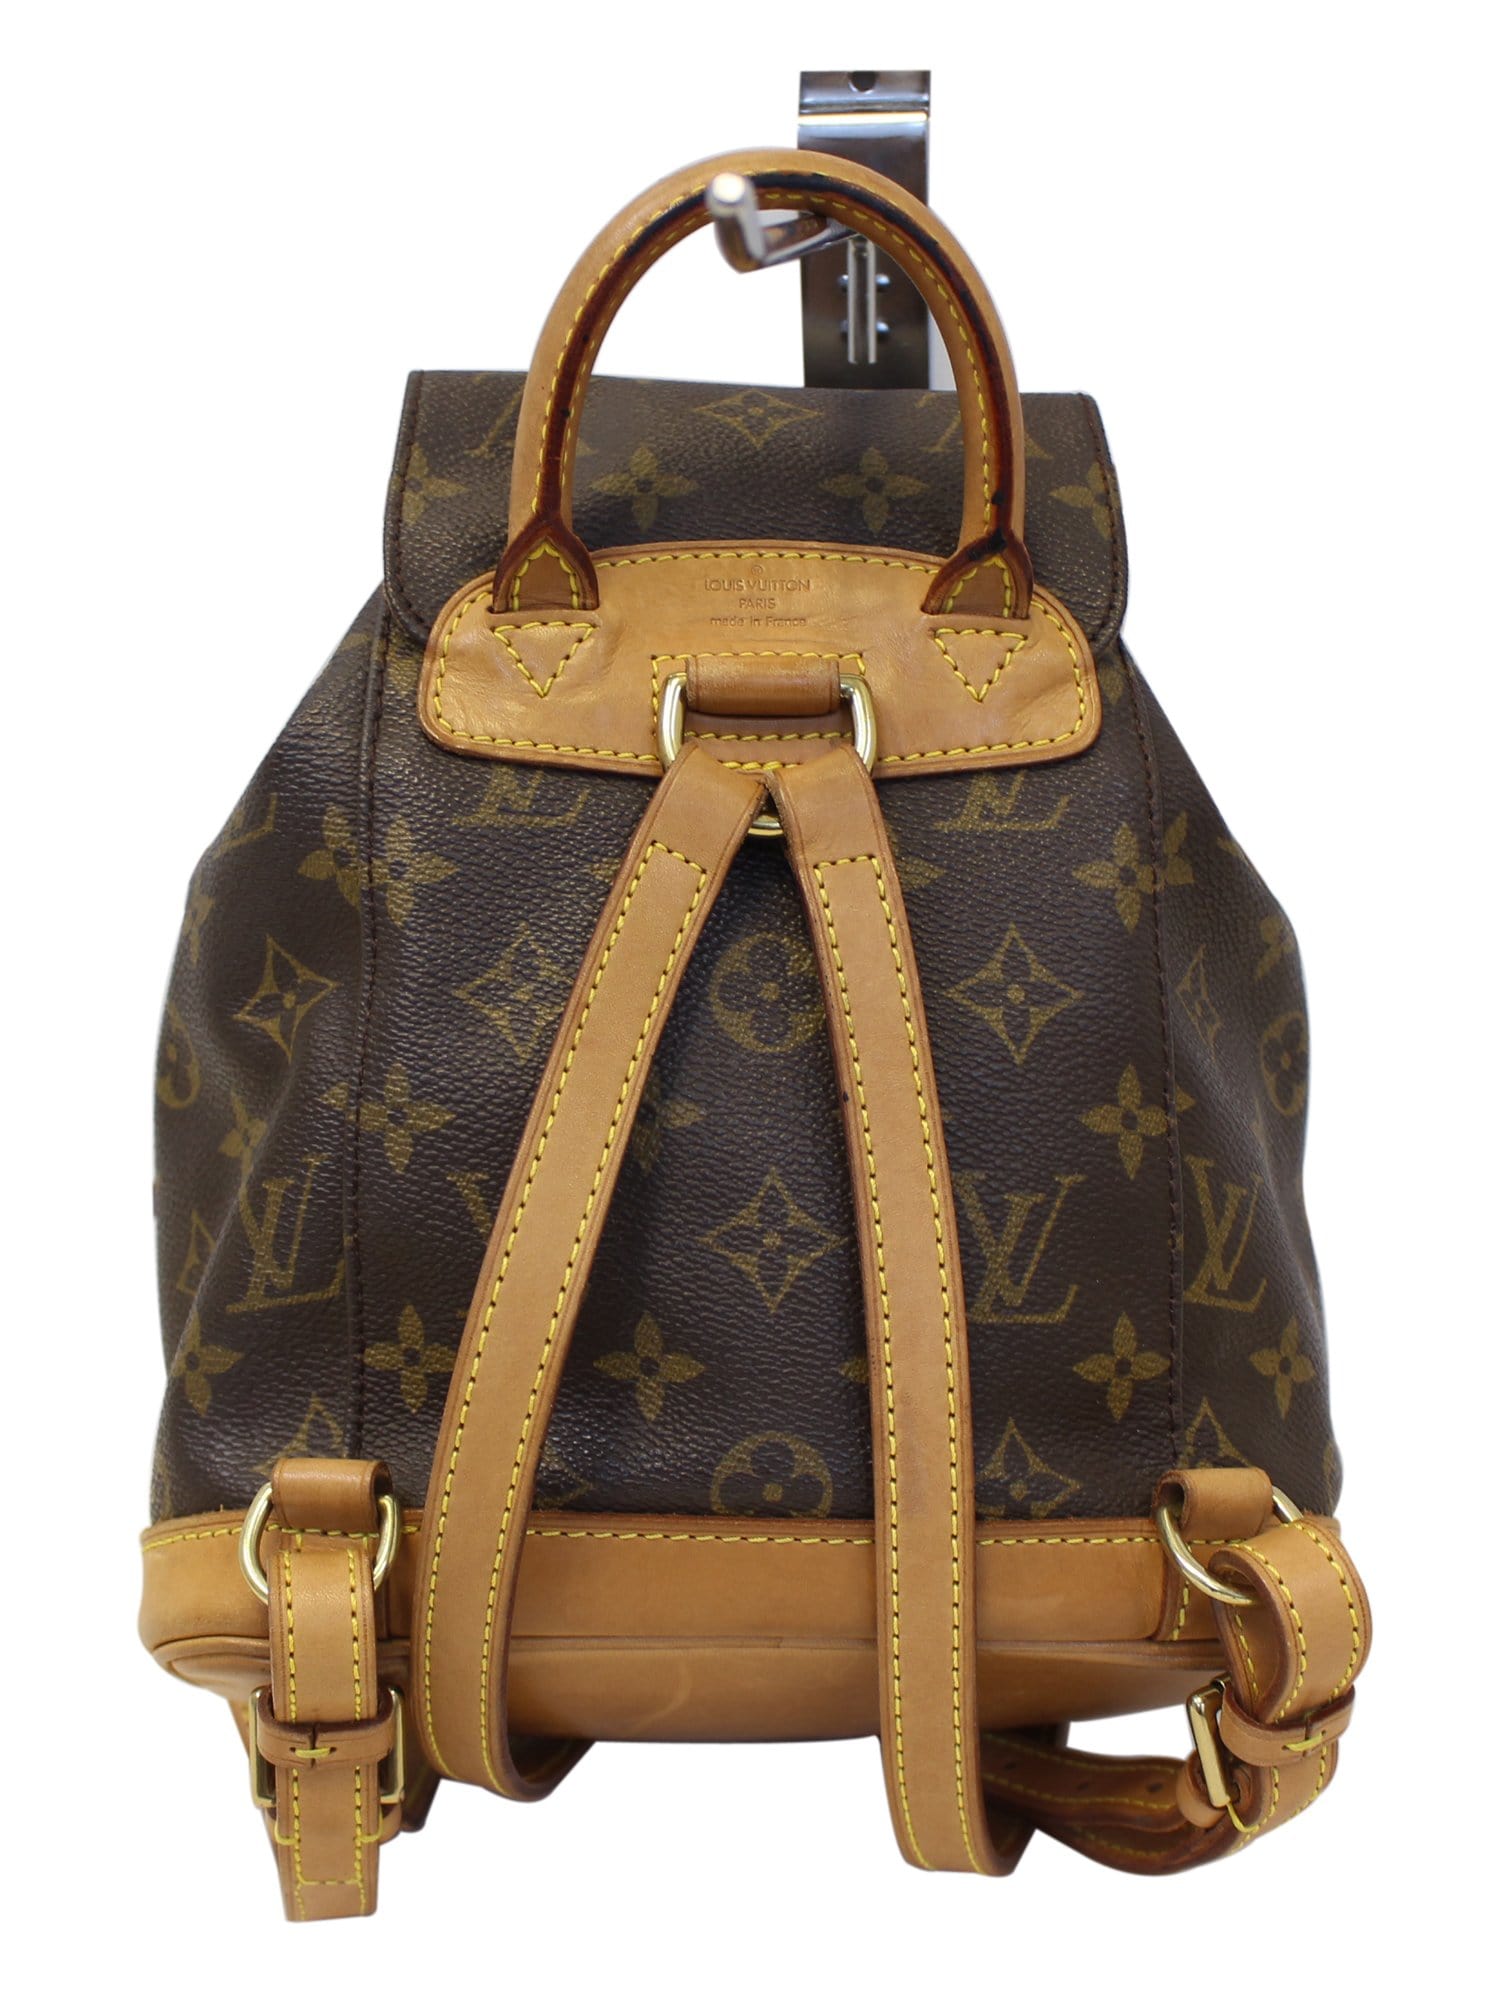 louis vuitton backpack，what style would you like?